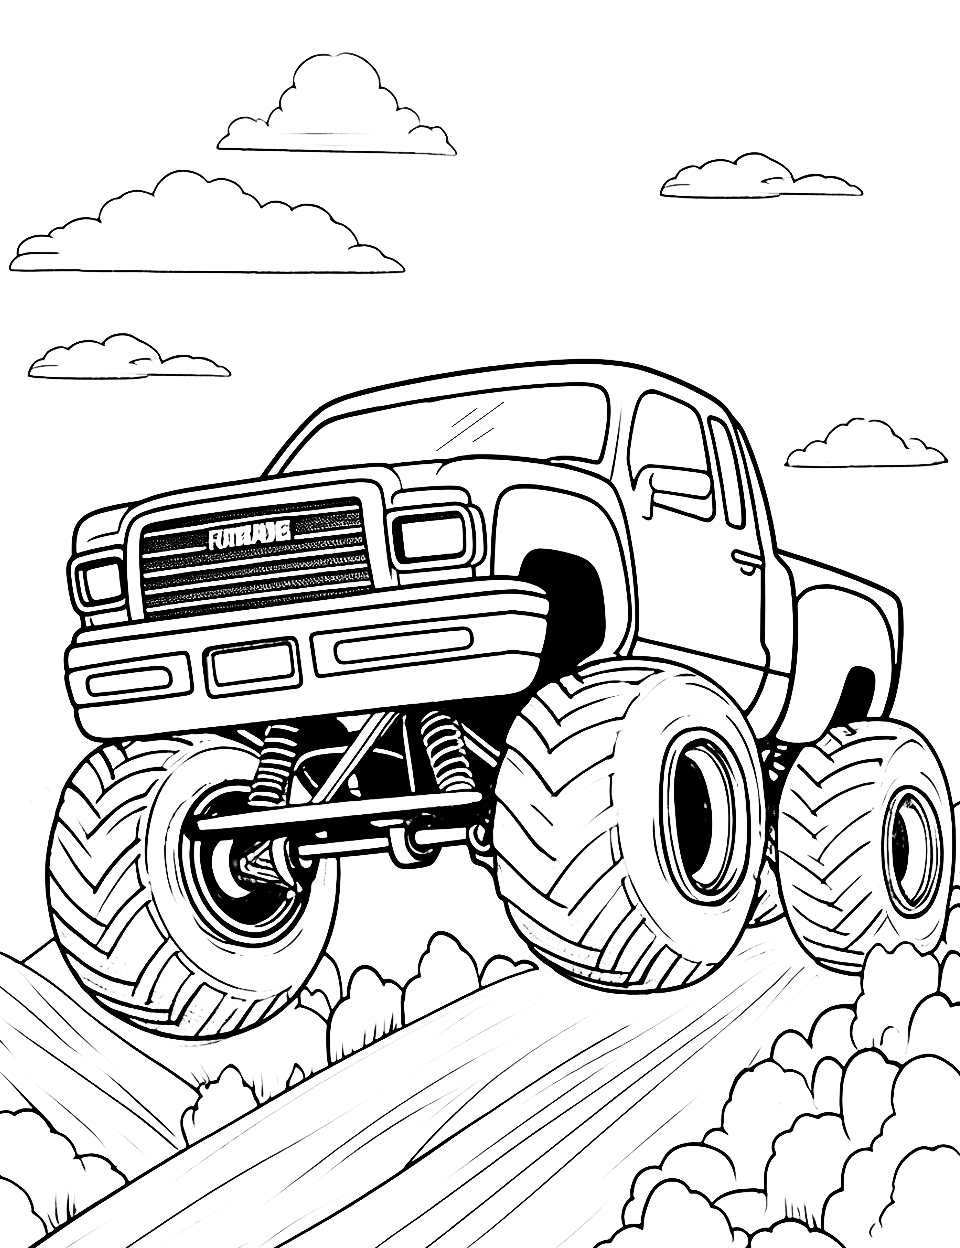 Flying Finish Monster Truck Coloring Page - A monster truck soaring towards the finish line.